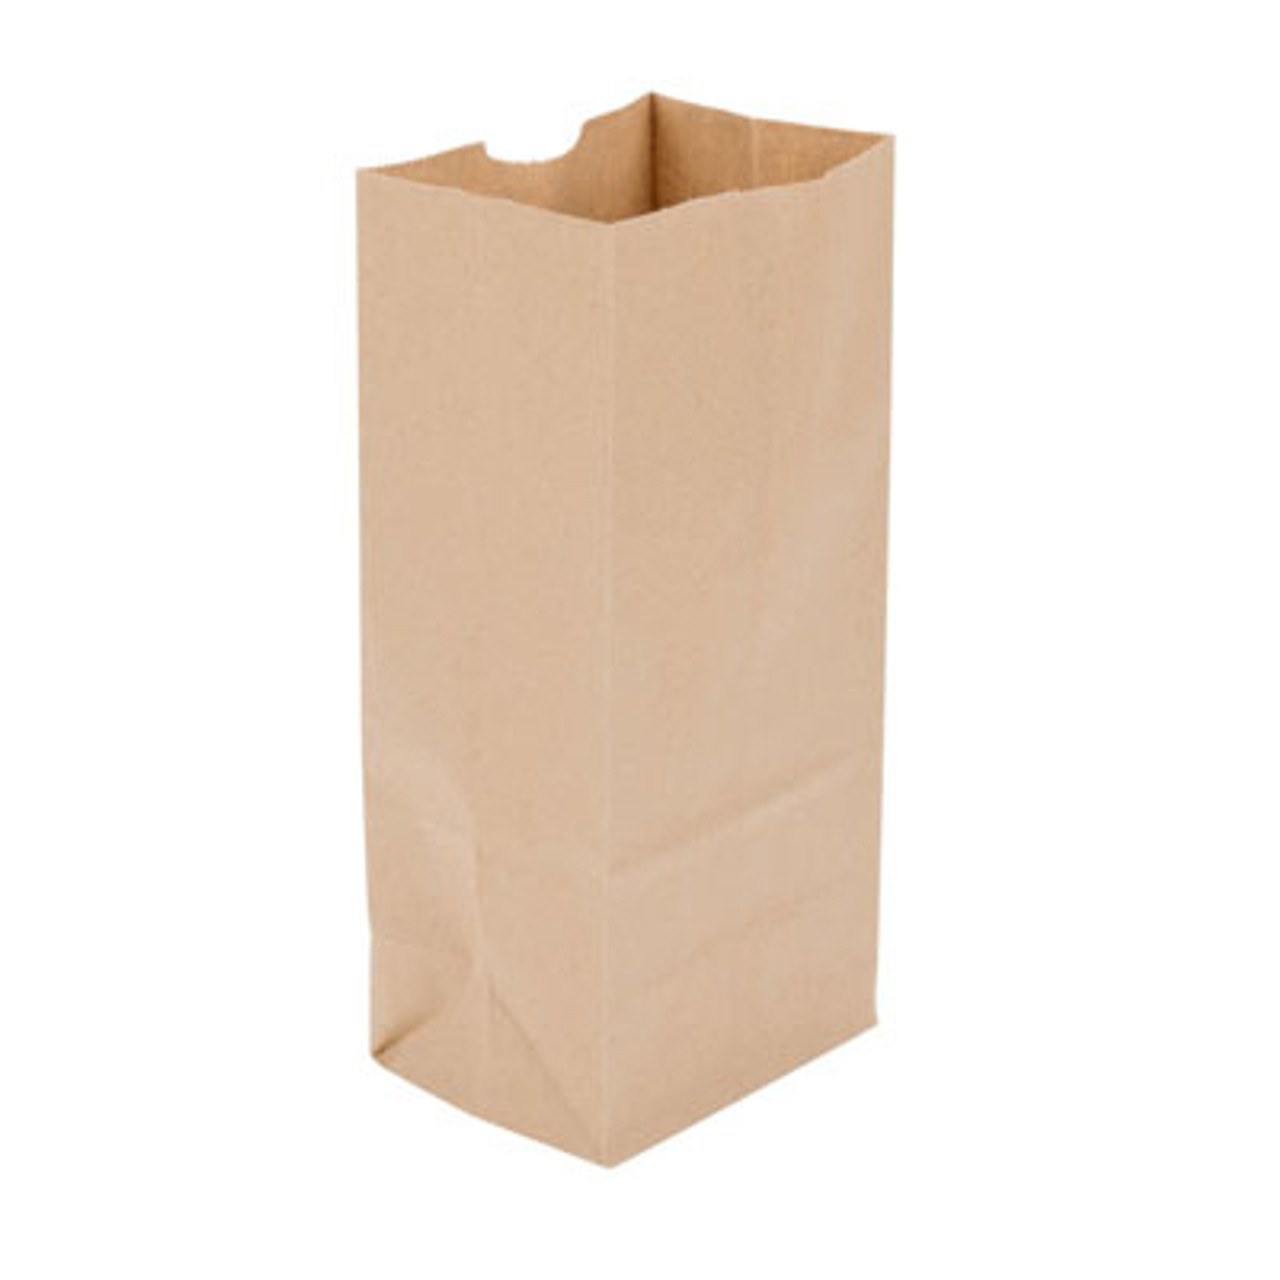 #20 Grocery Style Paper Bags 8-1/8" x 5-1/4" x 16" per 500